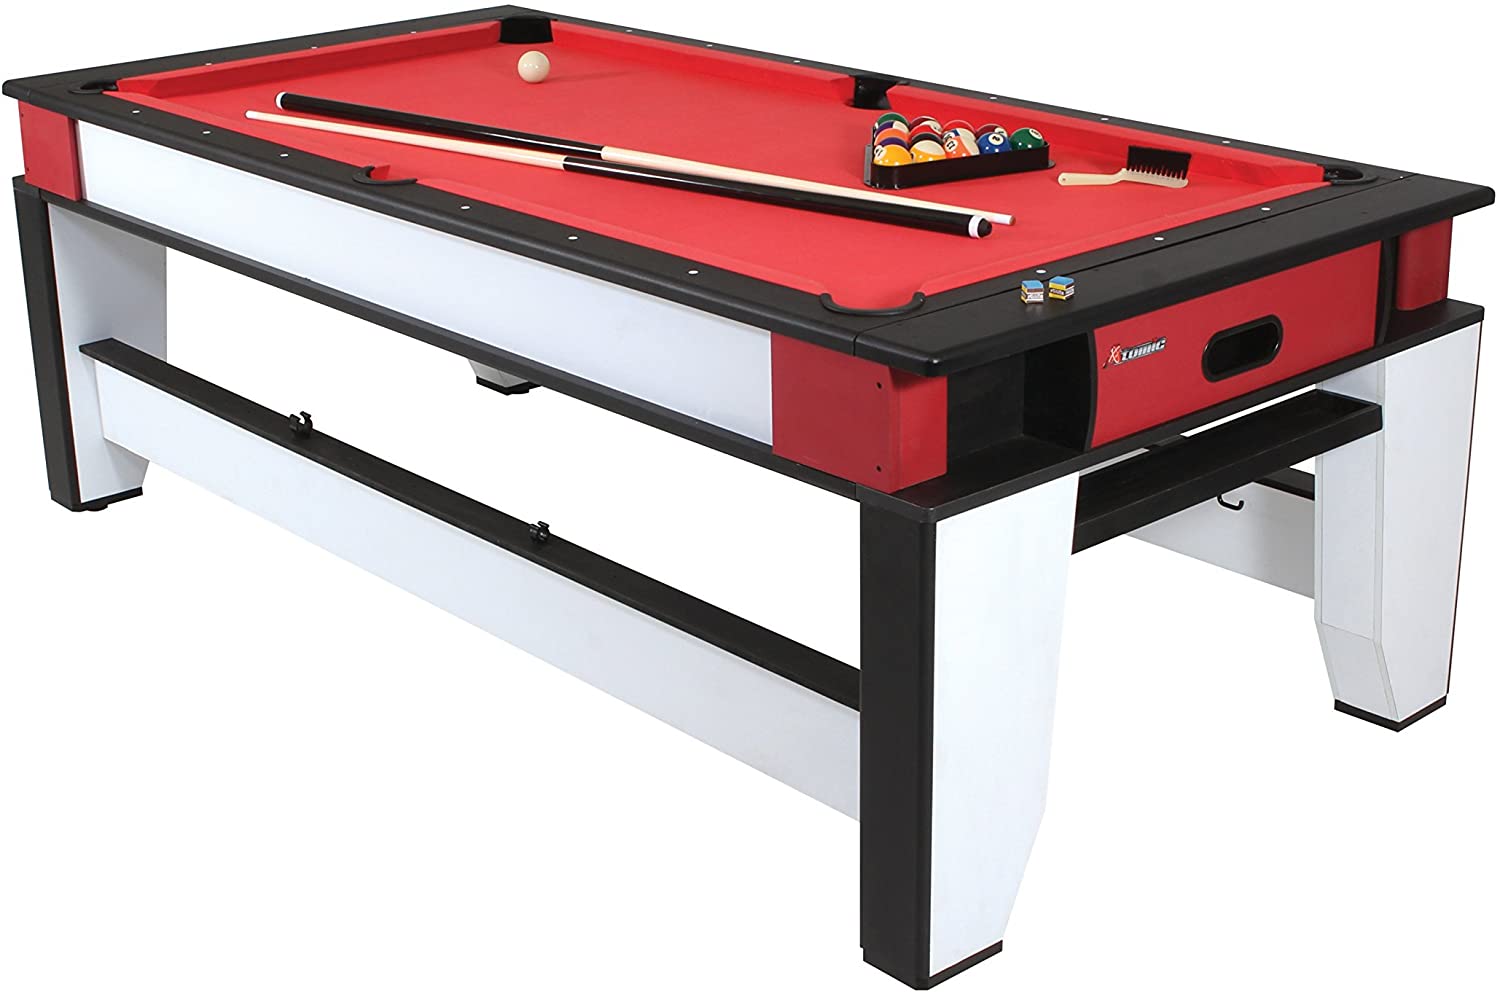 The Atomic 2-in-1 Flip Table has a red playing surface, rack, billiard balls, and a pair of cues